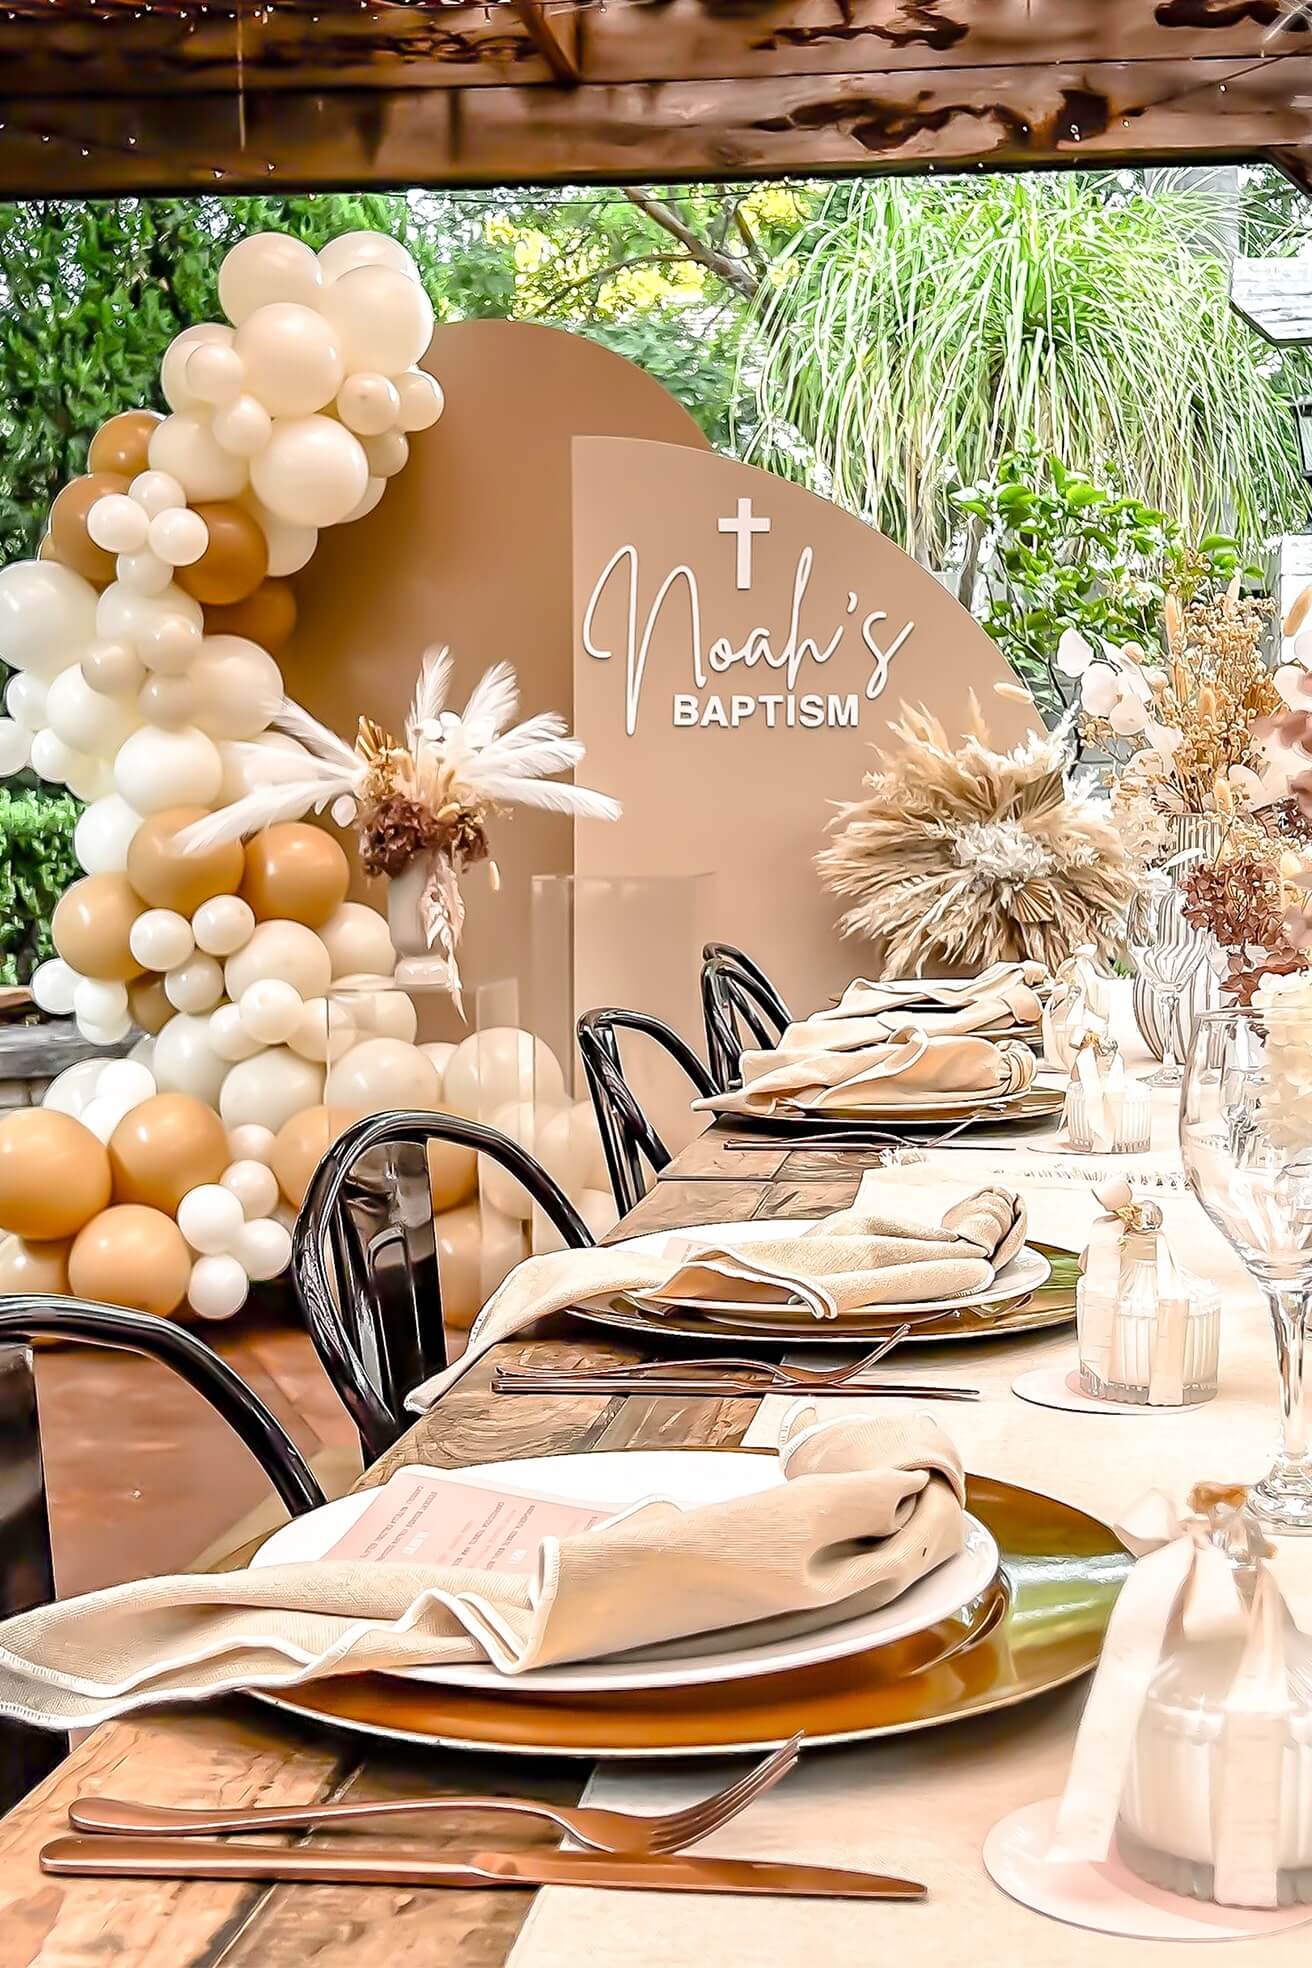 beige and brown arch backdrops with balloons and flowers behind boho table setting